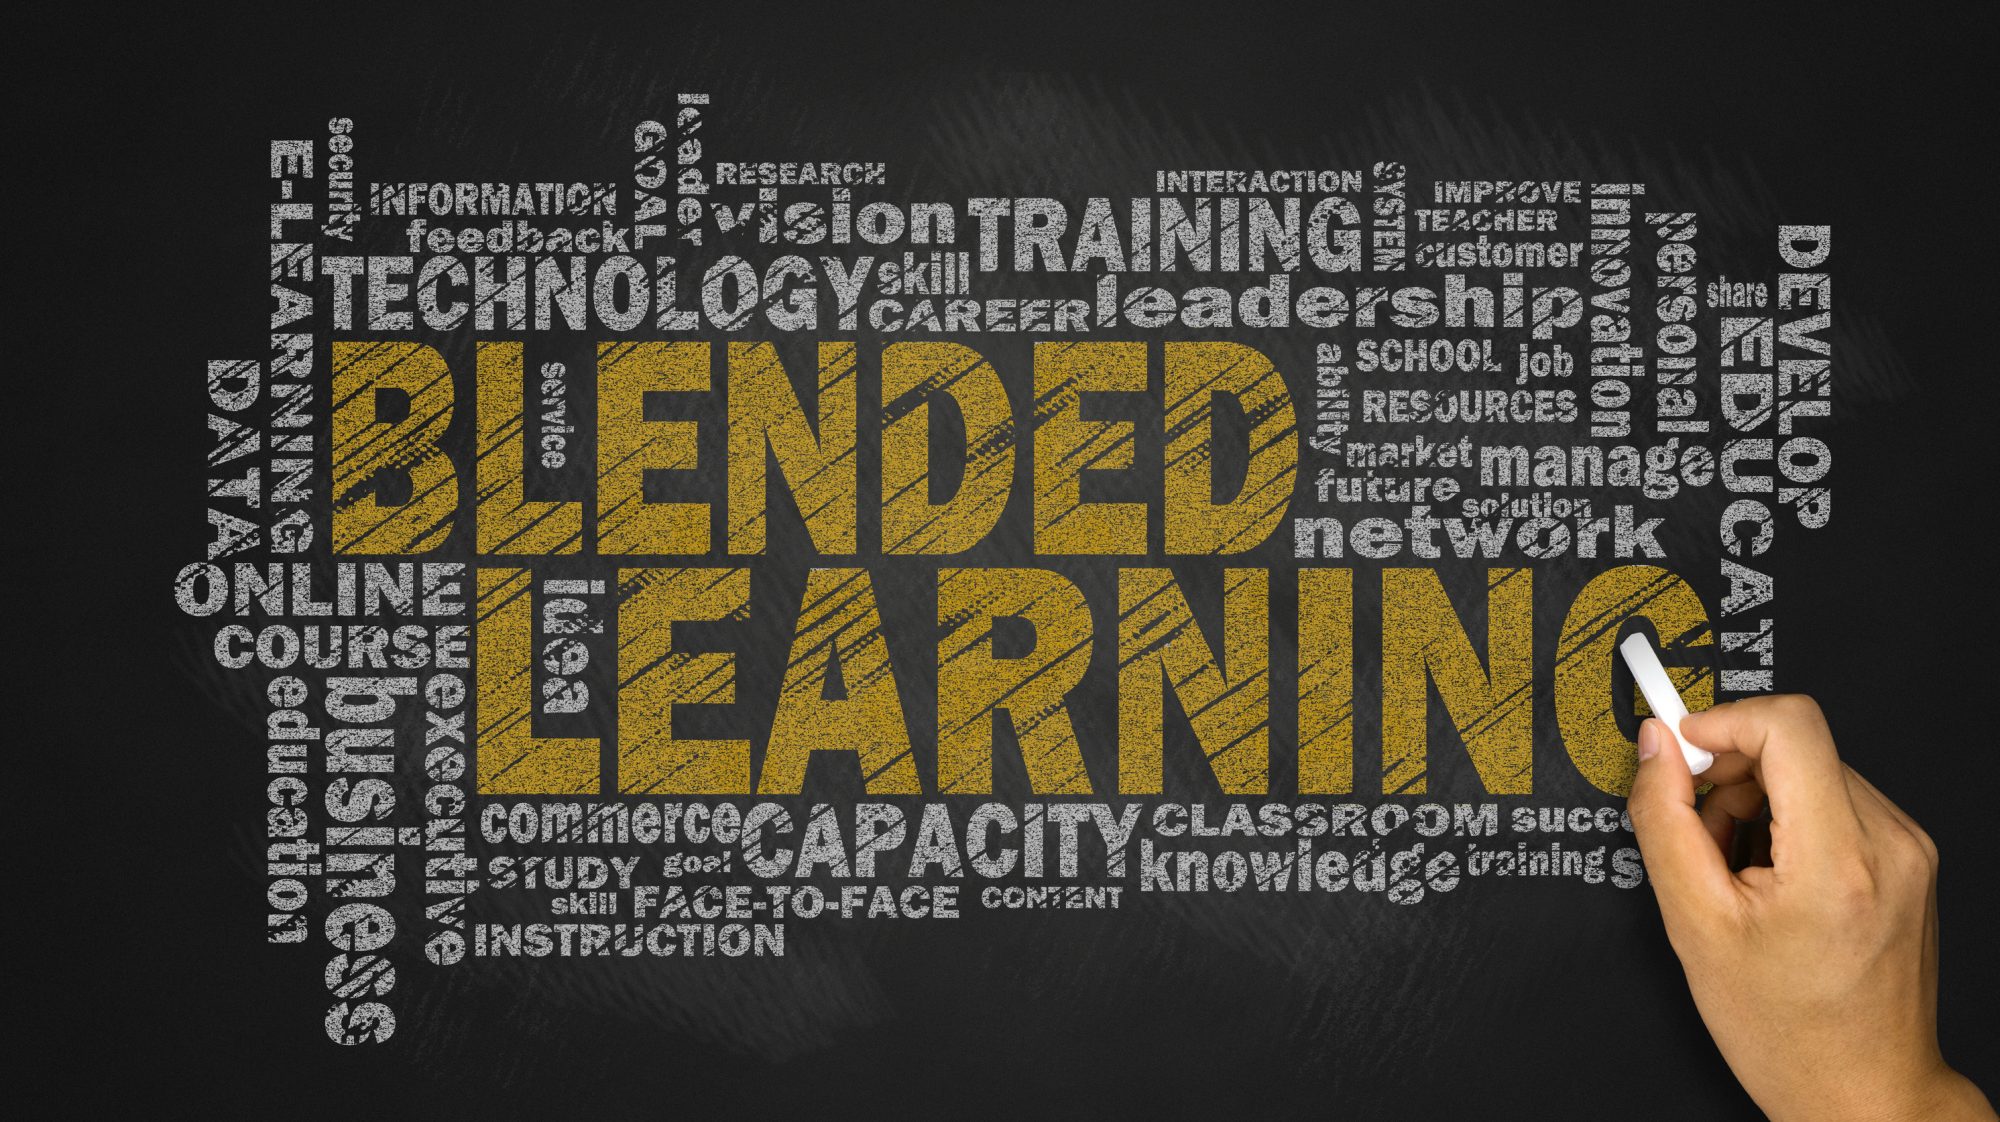 Mug ur Kostume What does higher education need to do to ensure successful blended learning?